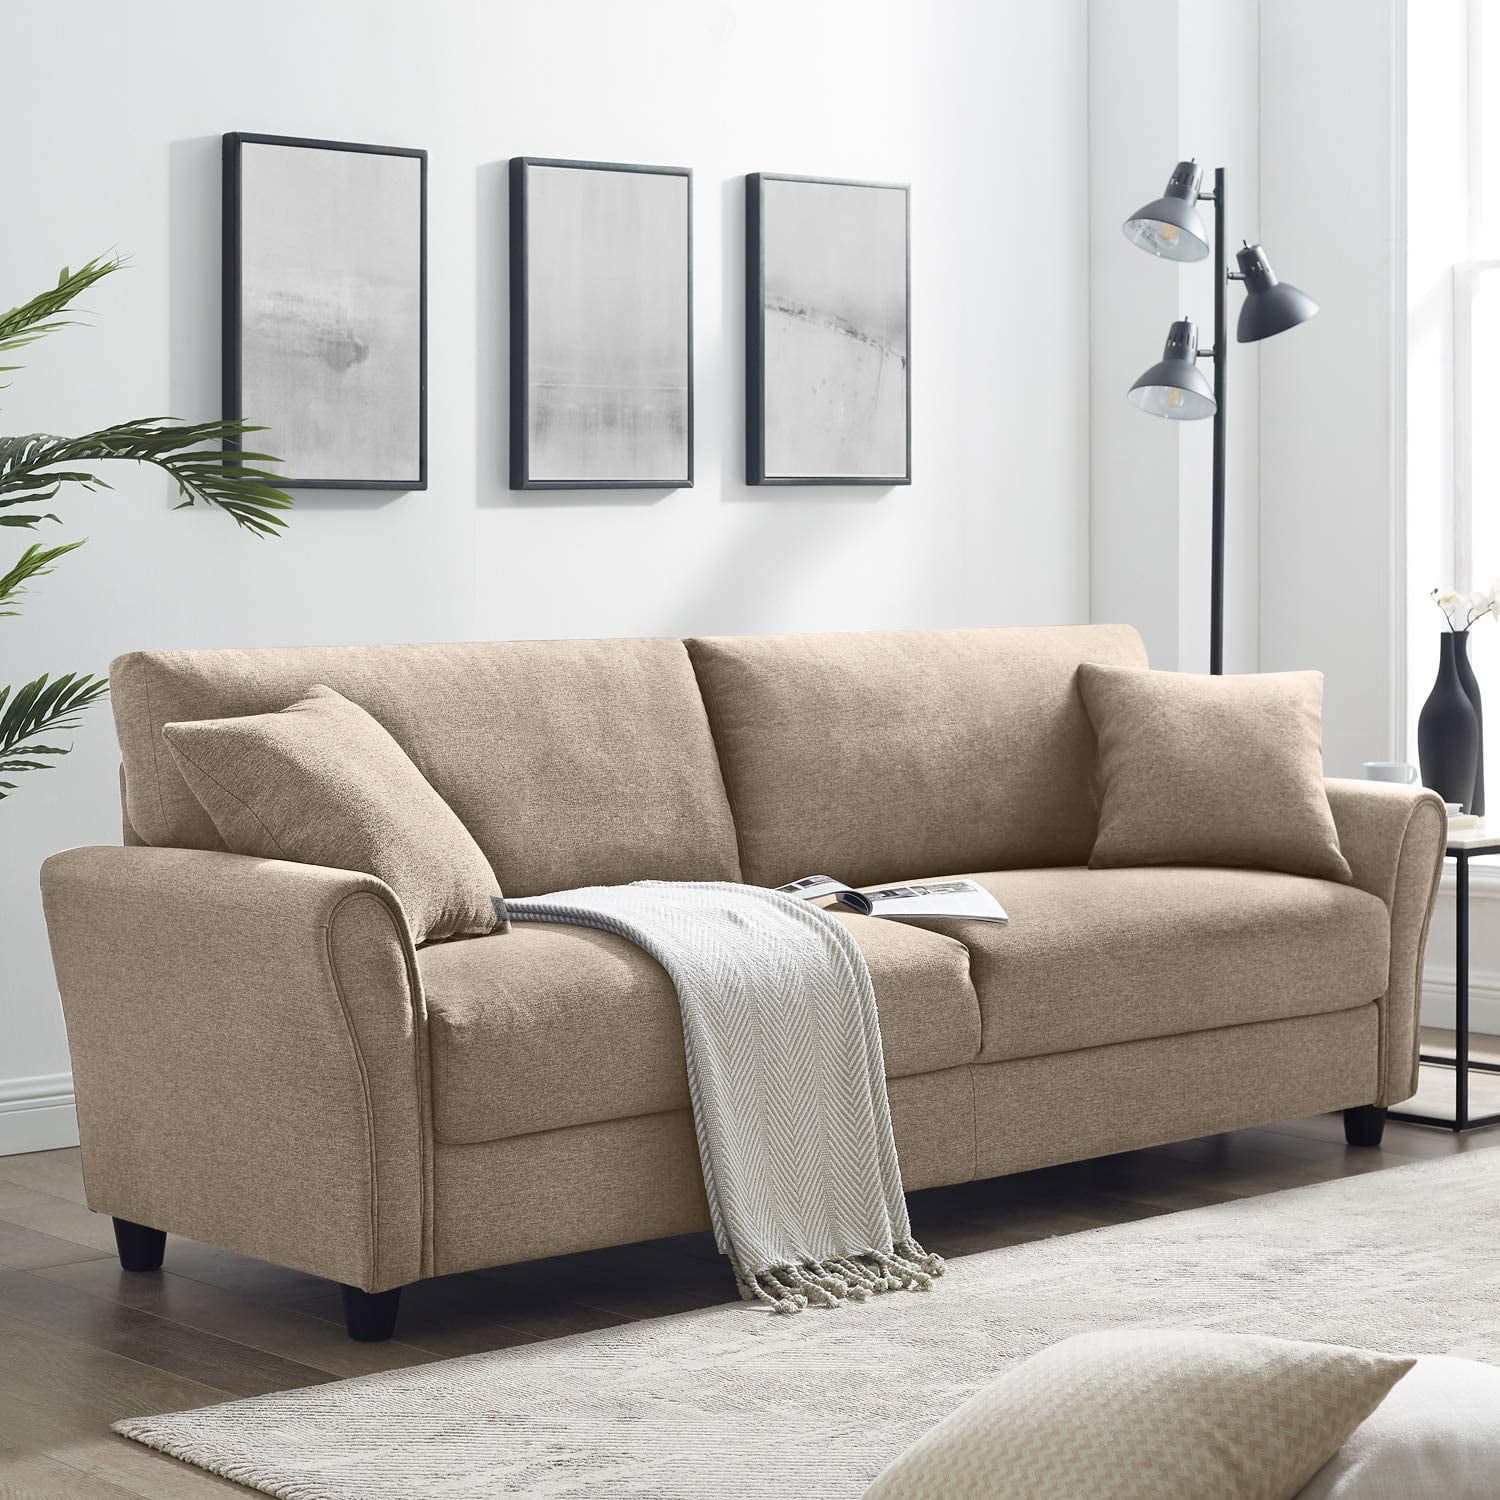 Furniture Sofas & Couches 85 Inch Couch Sofa Modern Upholstered Linen Pertaining To Sofas For Compact Living (Gallery 14 of 20)